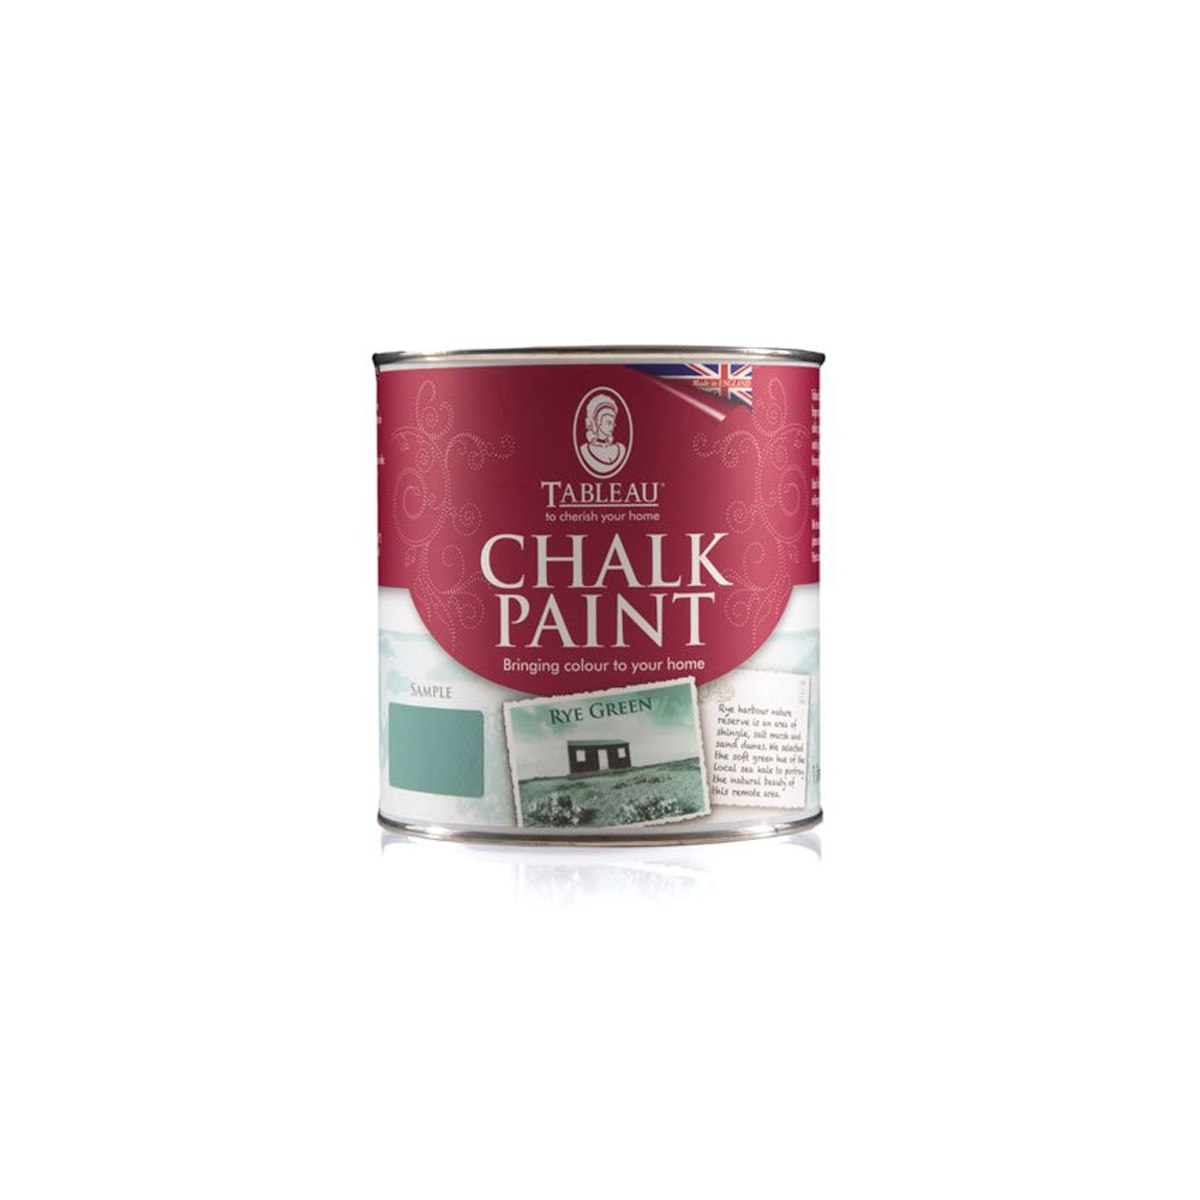 Tableau Chalky Paint Rye Green